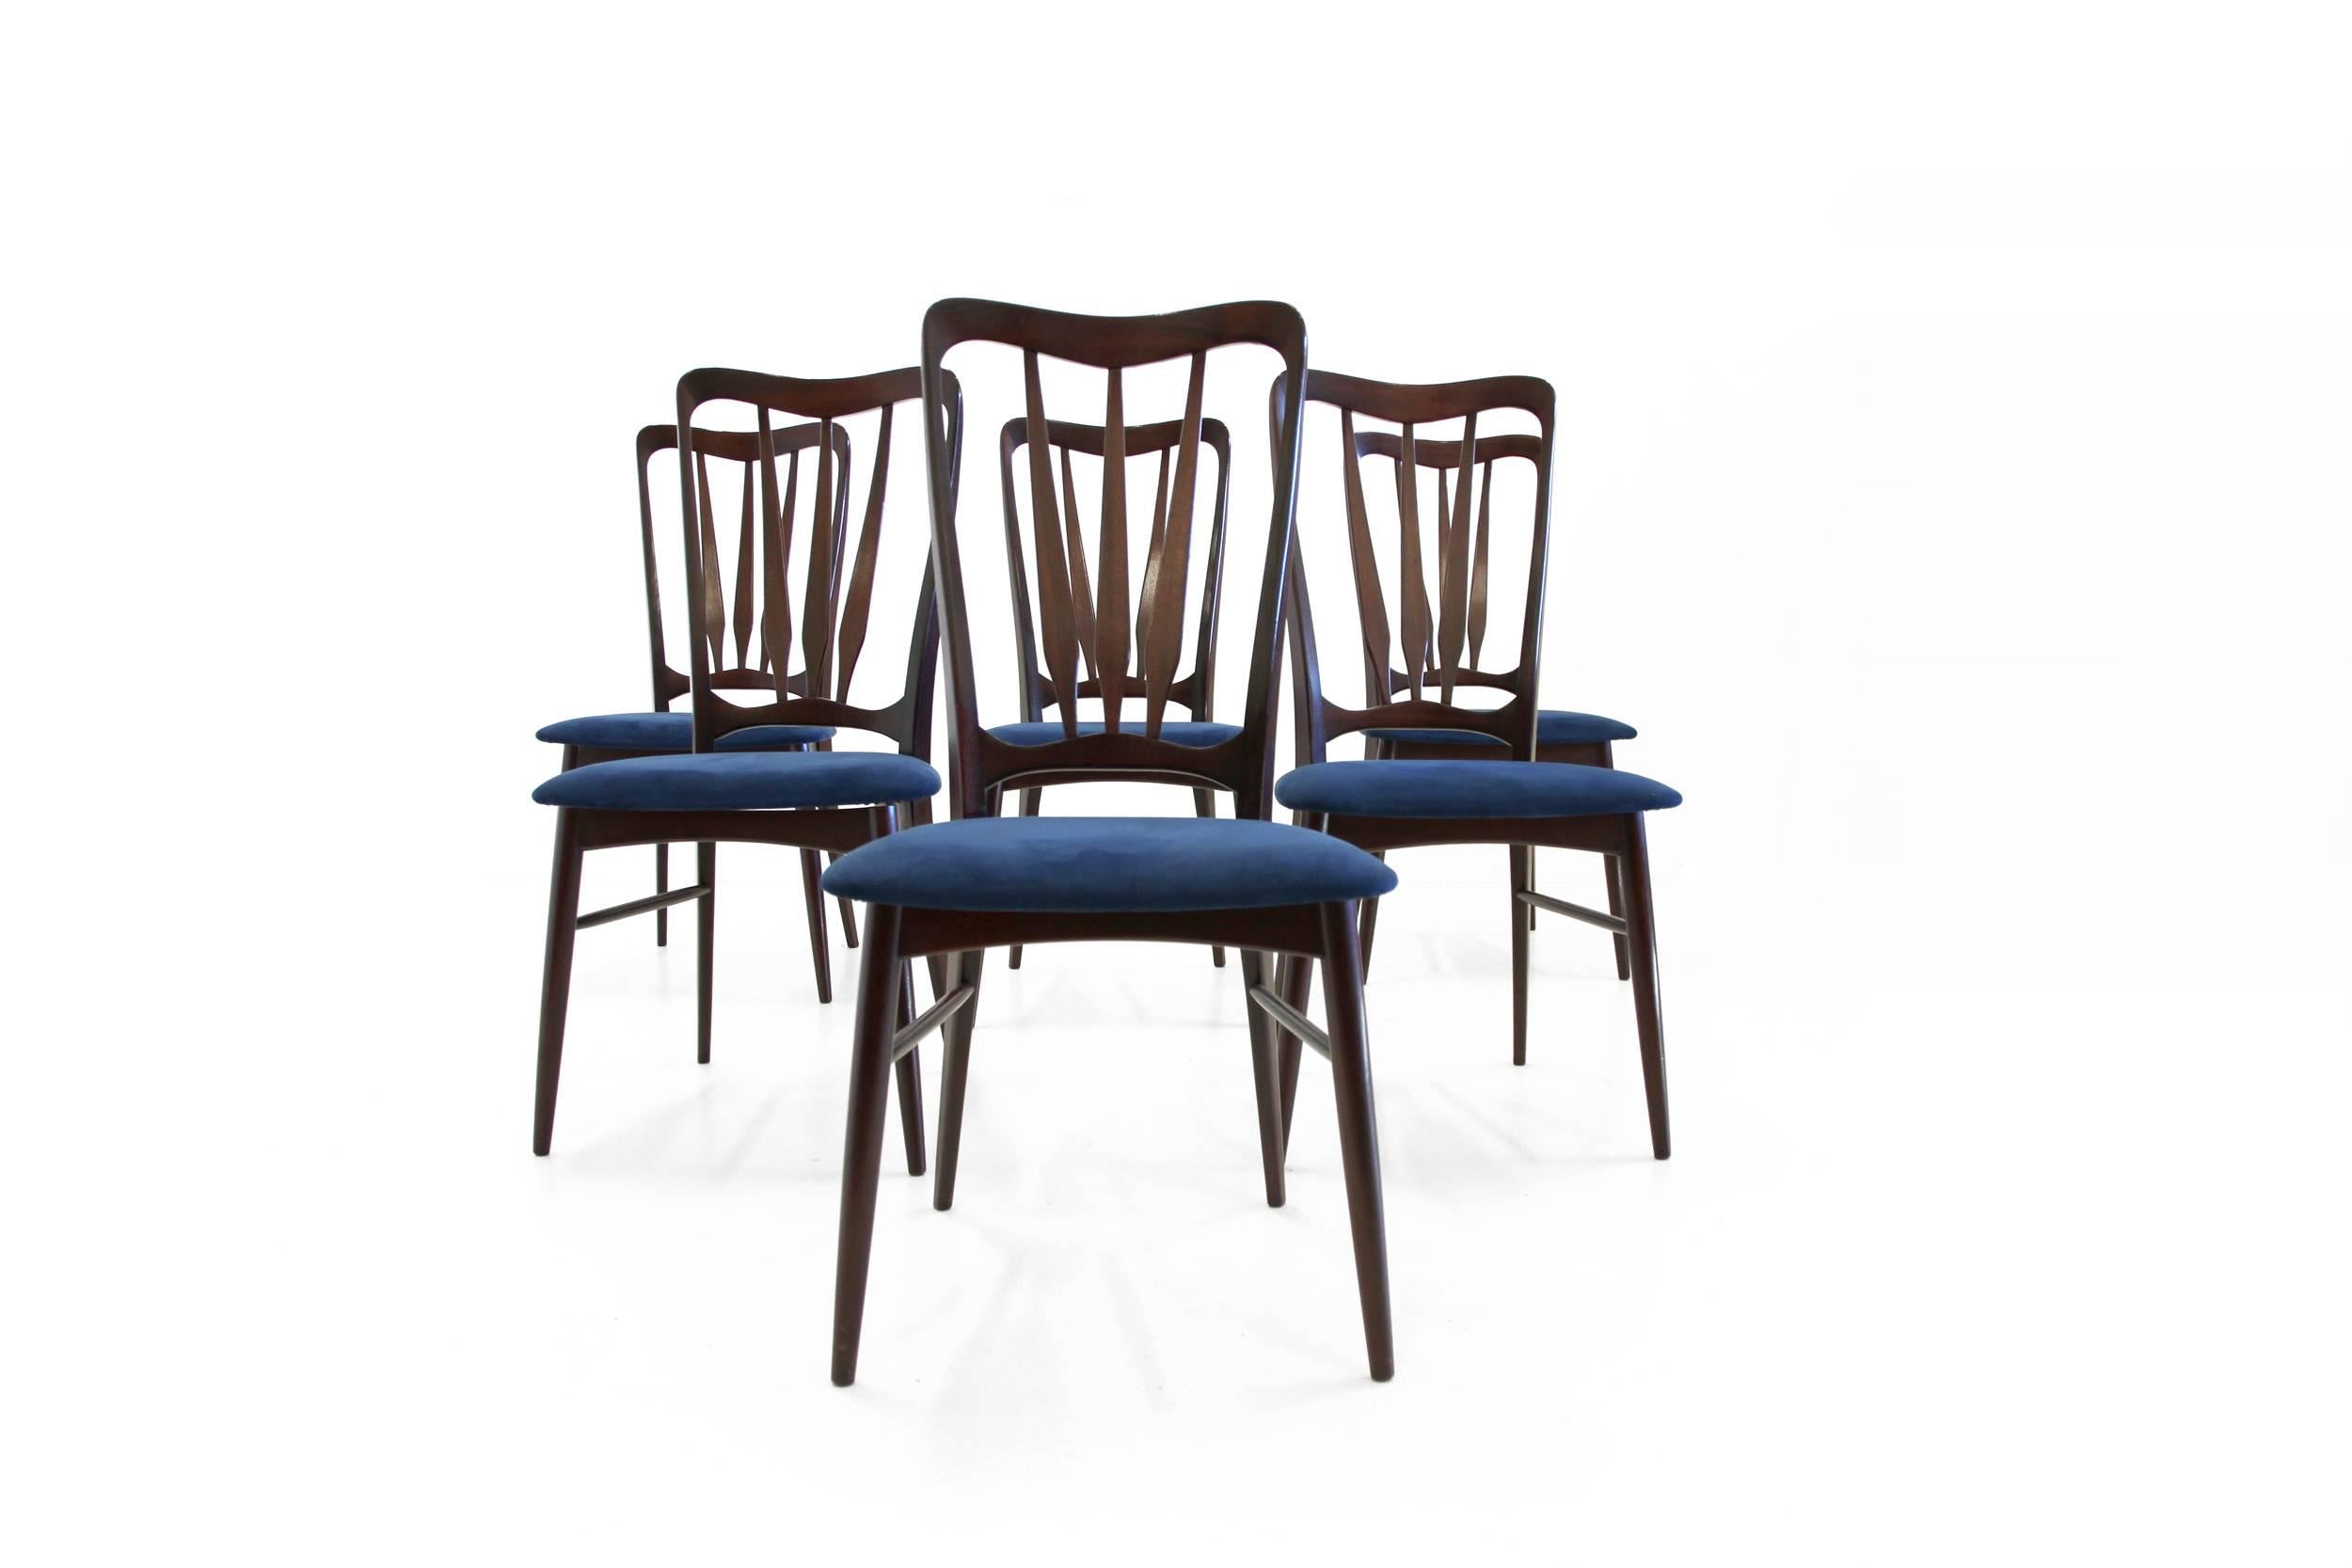 Set of six dining chairs on a mahogany frame. 

This is model 'Ingrid'. Designed by Niels Kofoed and made in Denmark by Hornslet Møbelfabrik from circa 1960, first half.

The chairs are in excellent vintage condition with a sturdy framework.